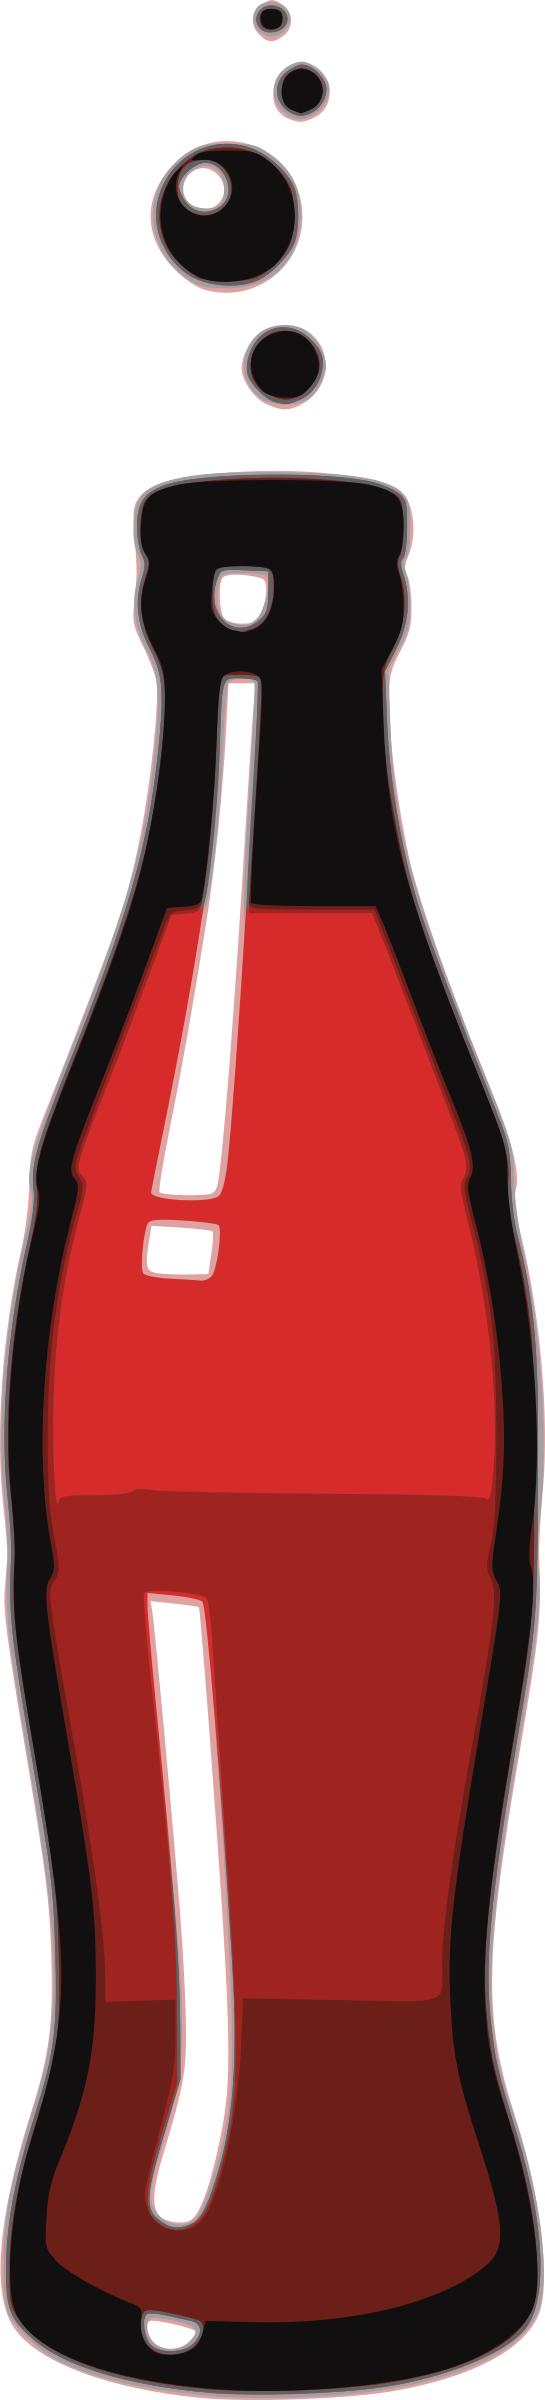 Bottle with Soda png